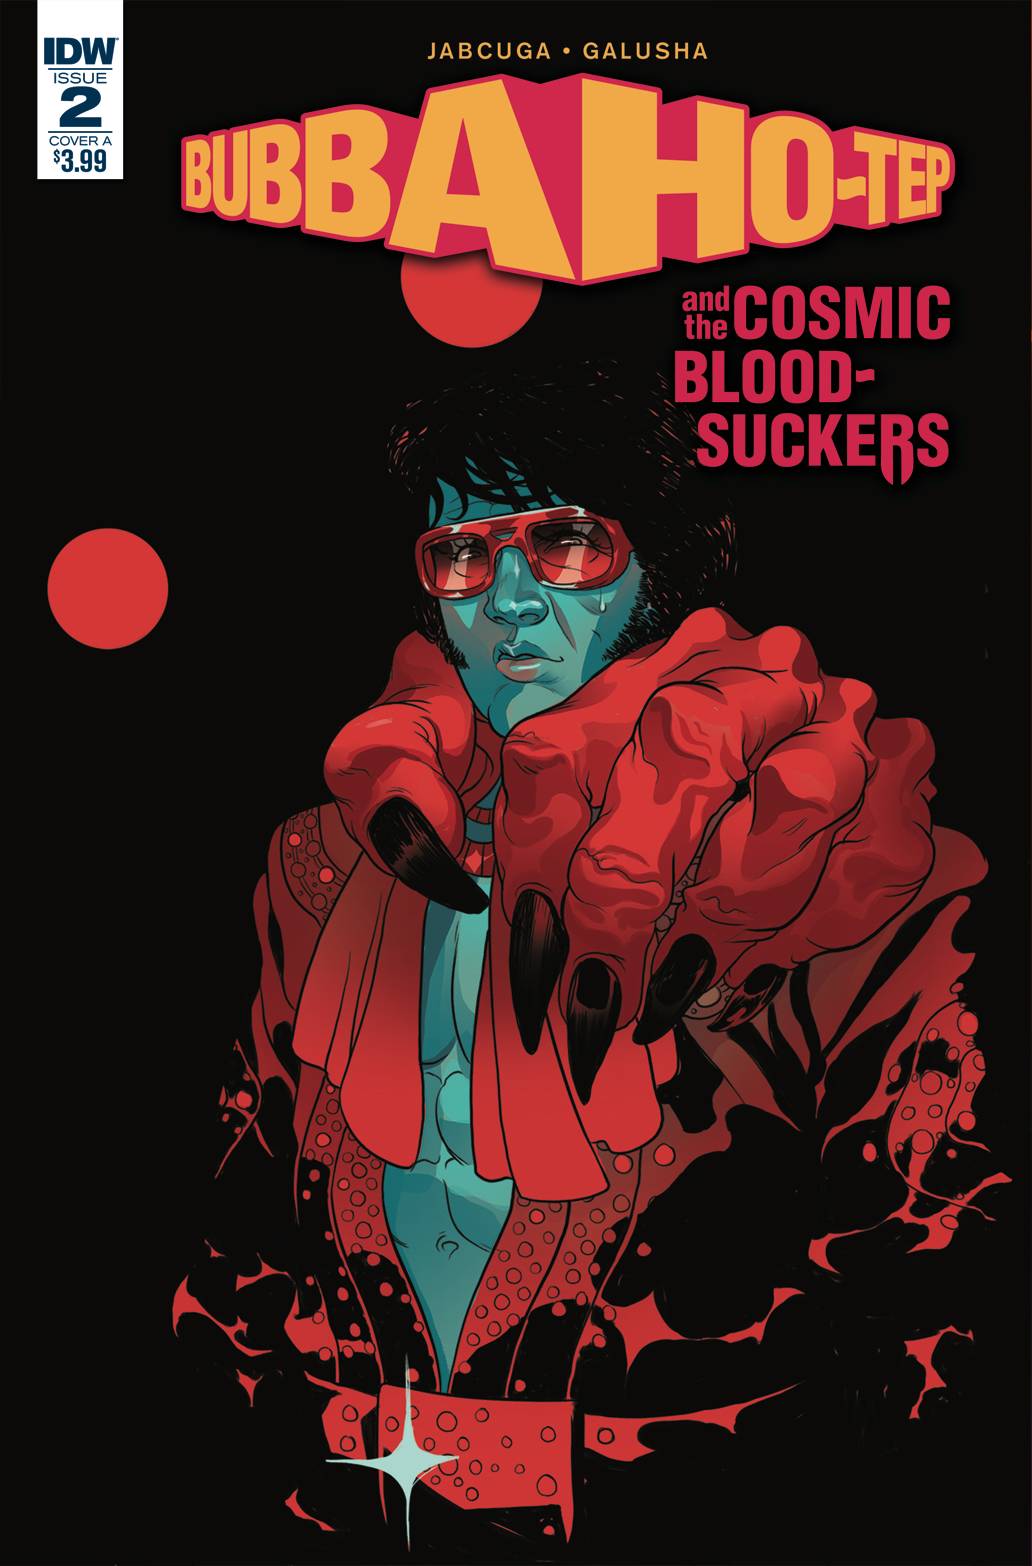 Bubba Ho-Tep & Cosmic Blood-Suckers #2 Cover A Rivas